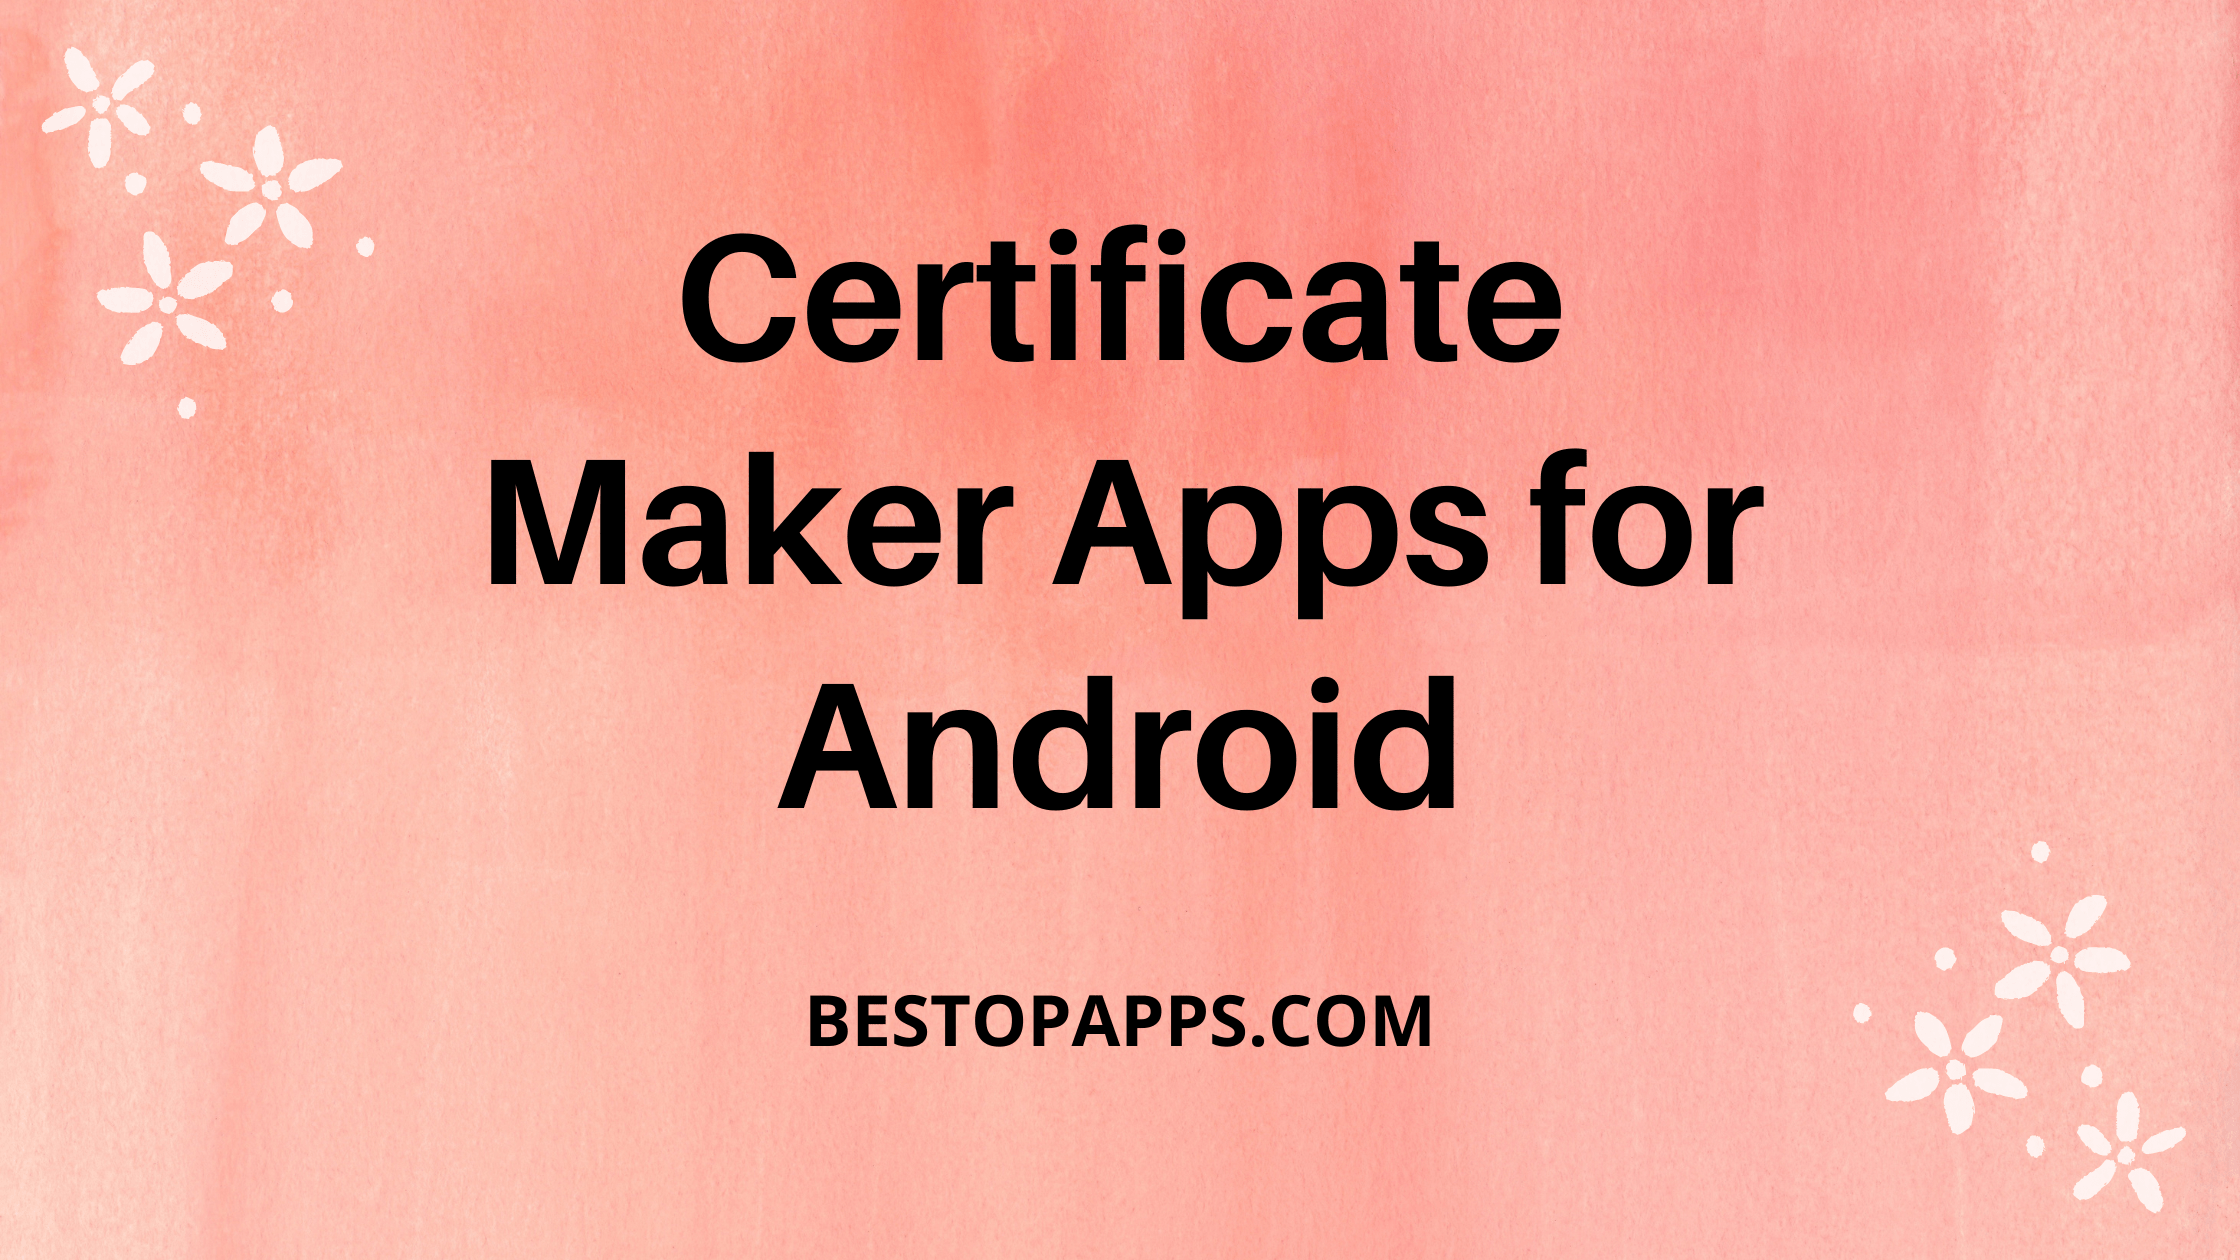 Certificate Maker Apps for Android